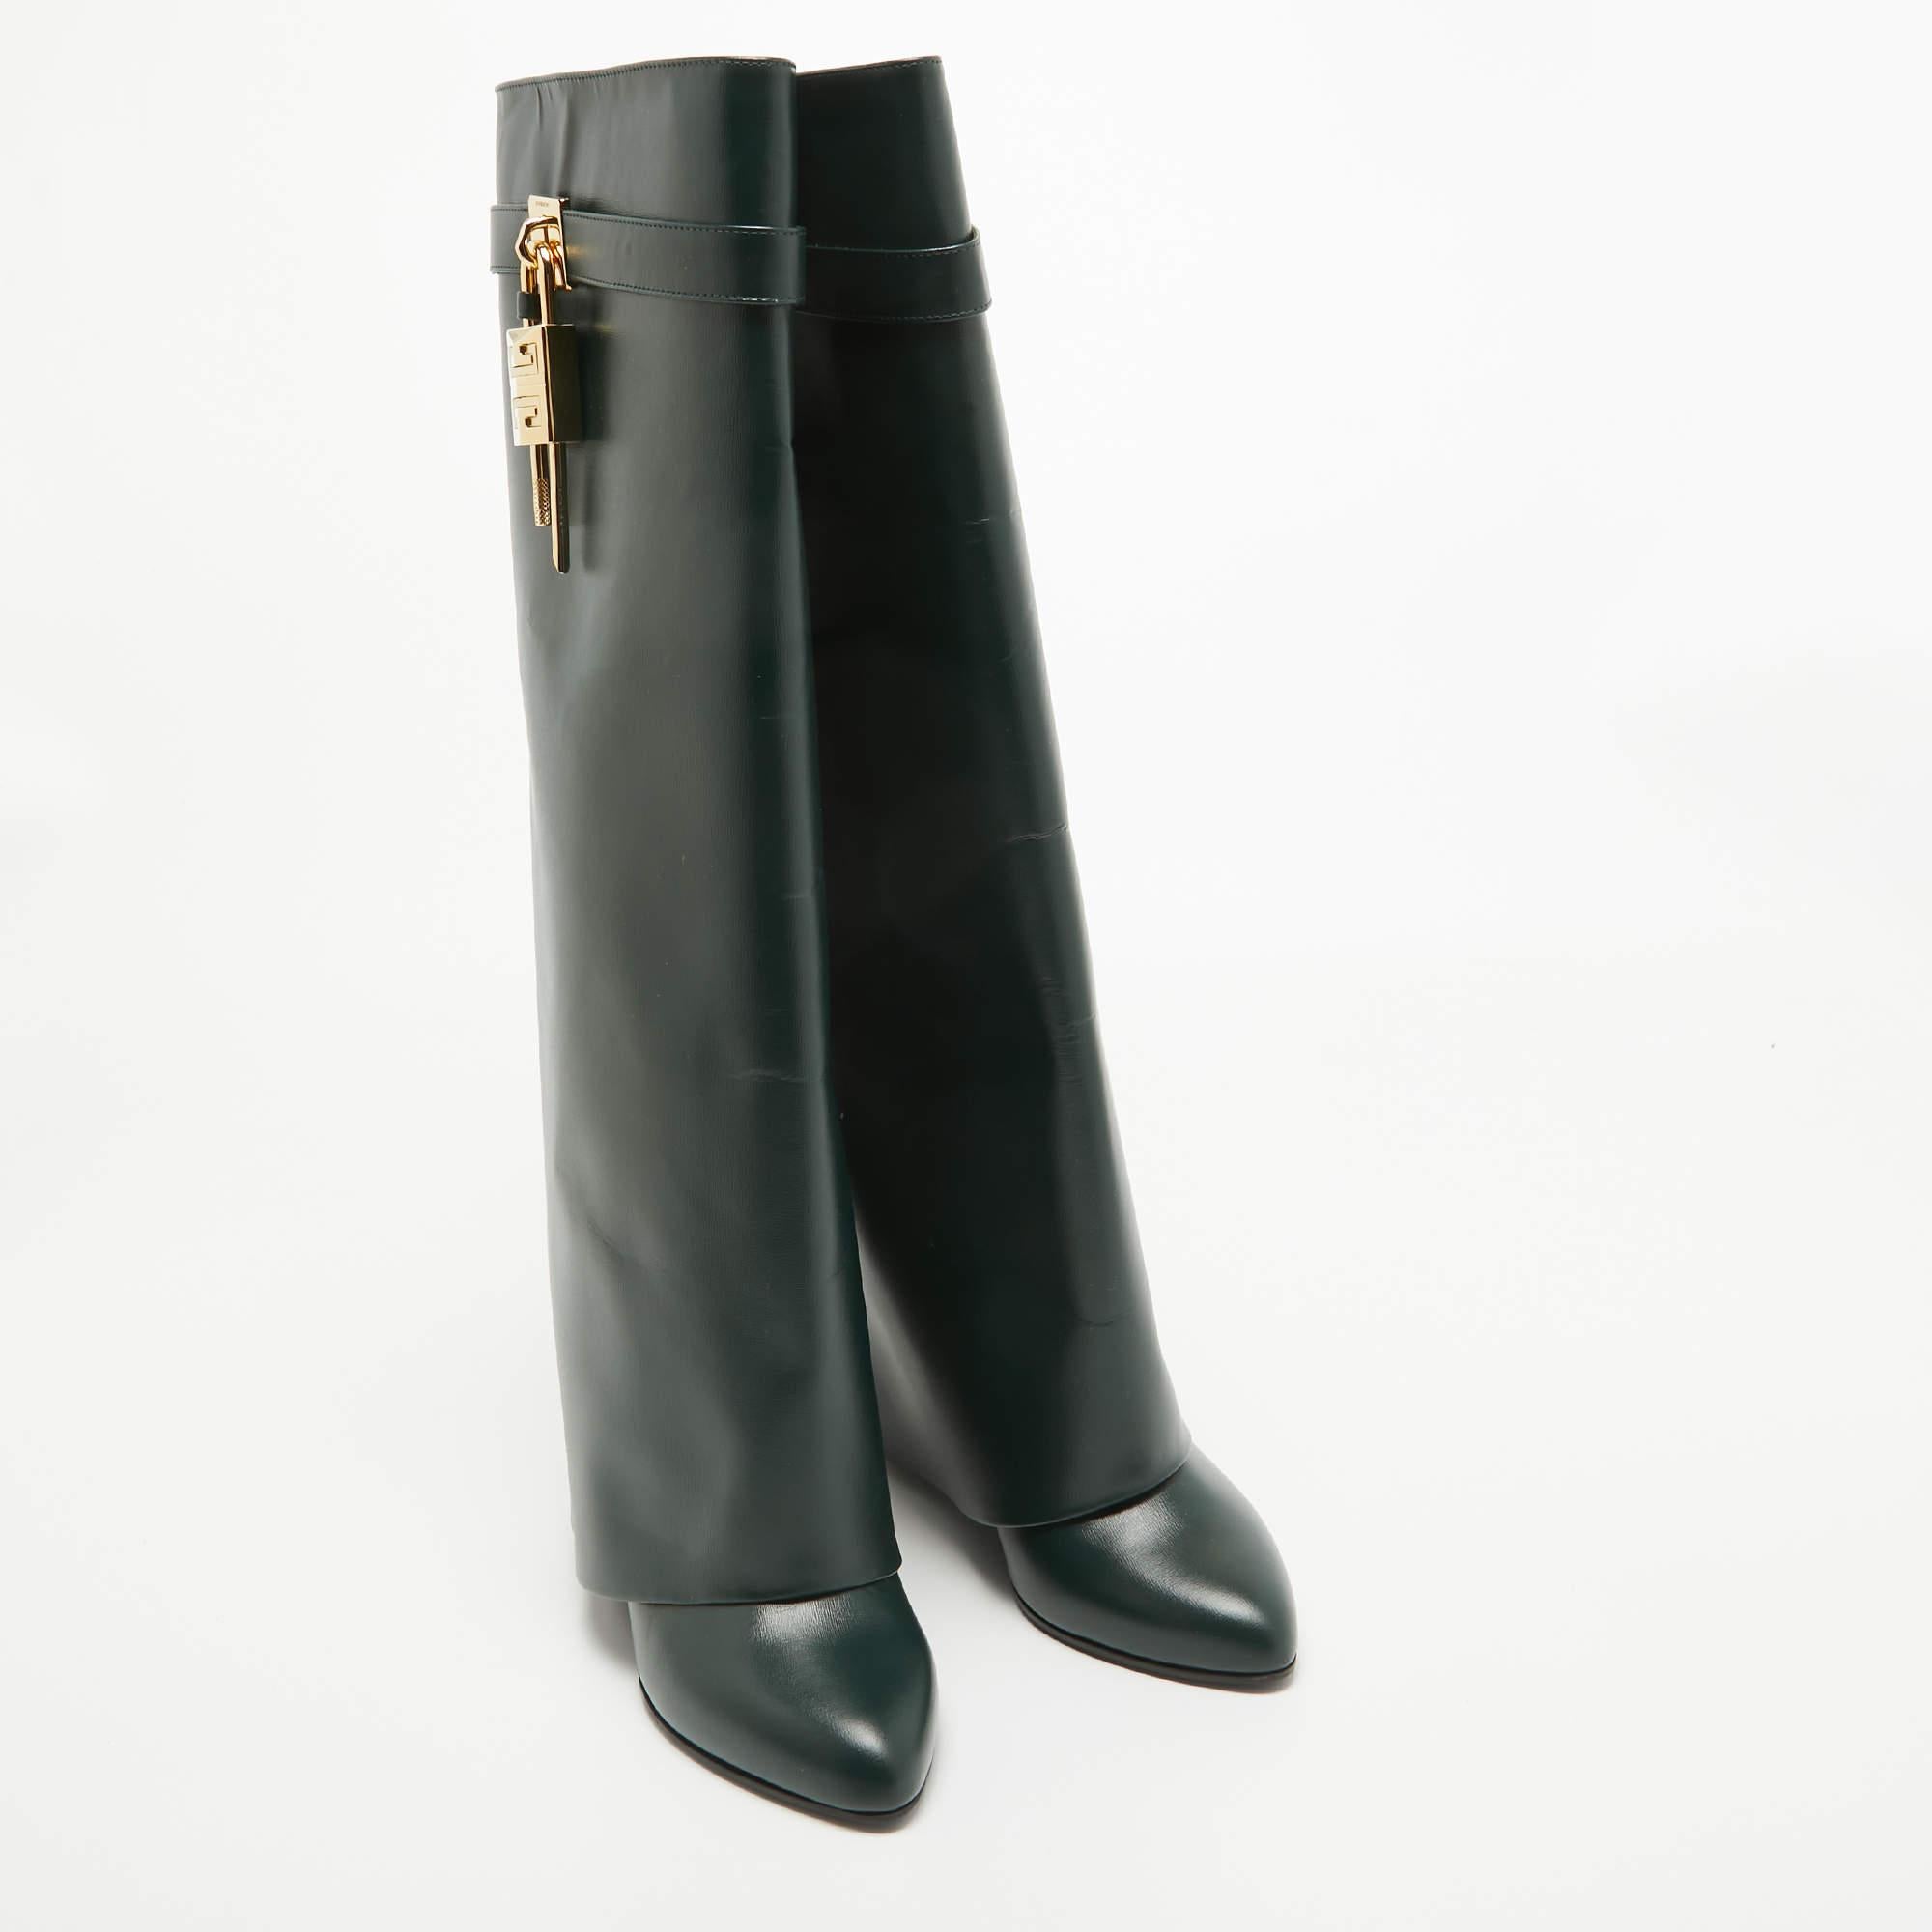 Women's Givenchy Green Leather Shark Lock Wedge Knee Length Boots Size 40